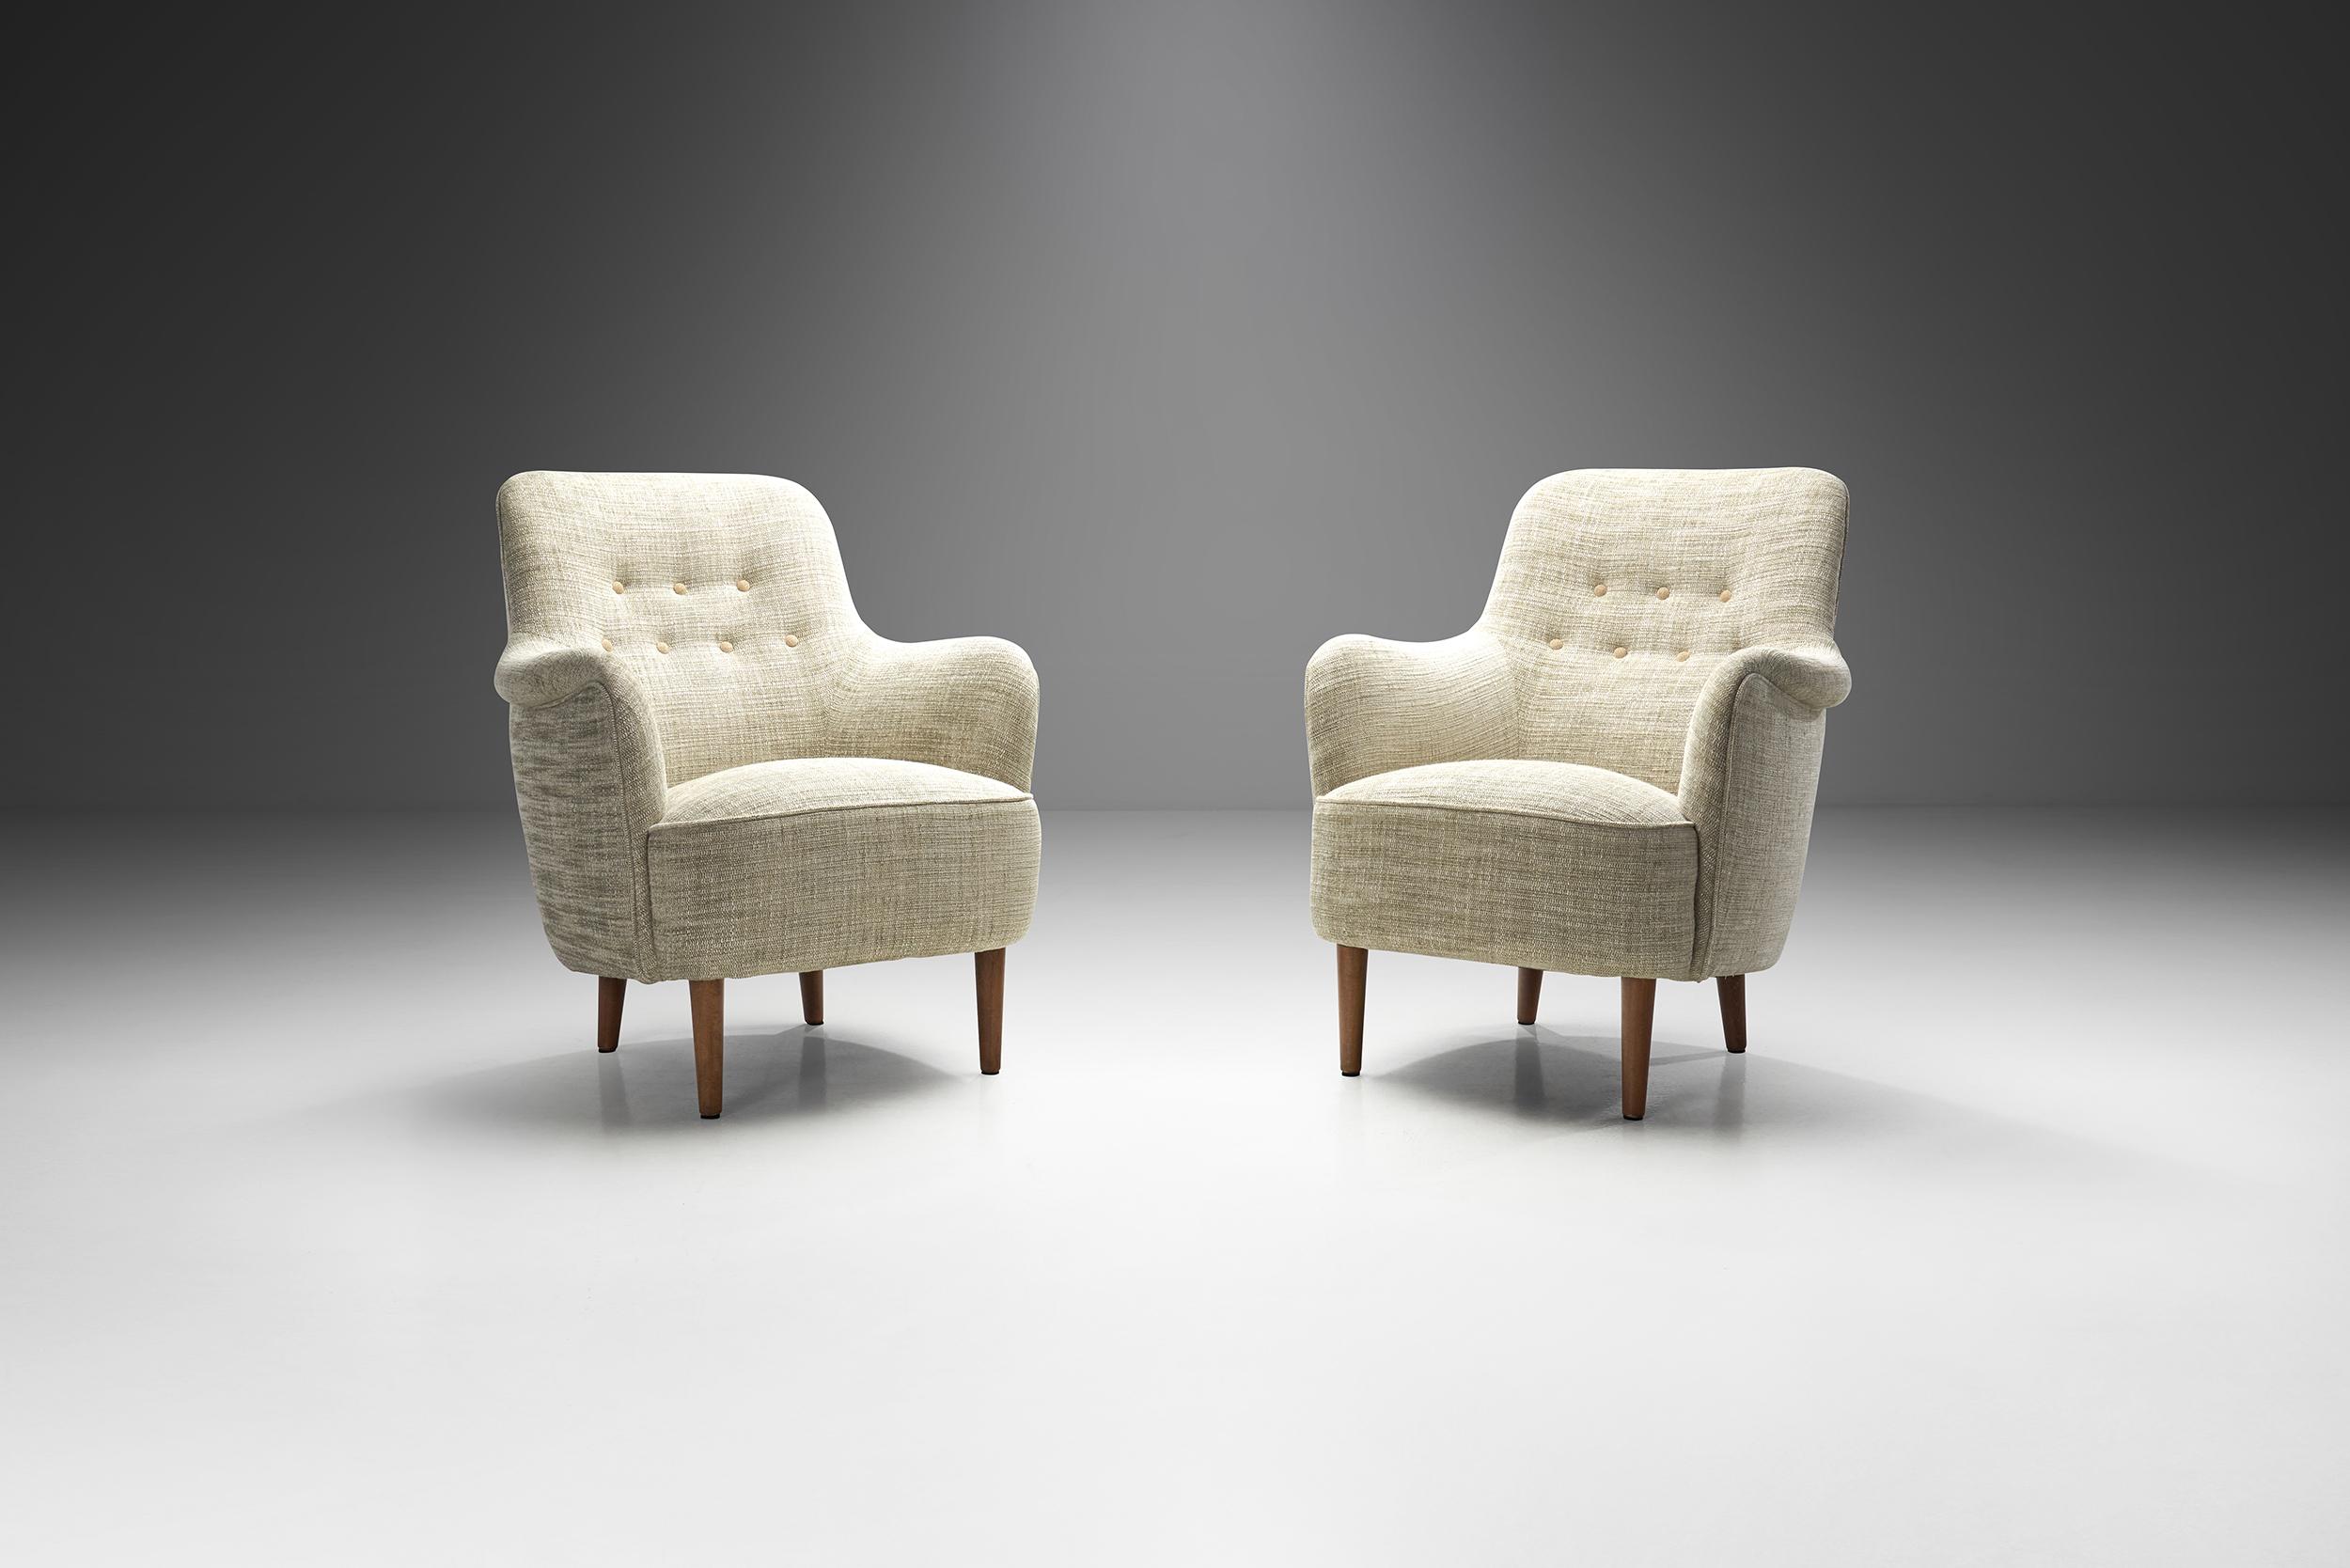 “Samsas” is for many the most associated model with Carl Malmsten. The designer devoted his life to the renewal of traditional Swedish craftsmanship, inspired by Swedish country manors and rustic styles. In this spirit, Samsas is today regarded as